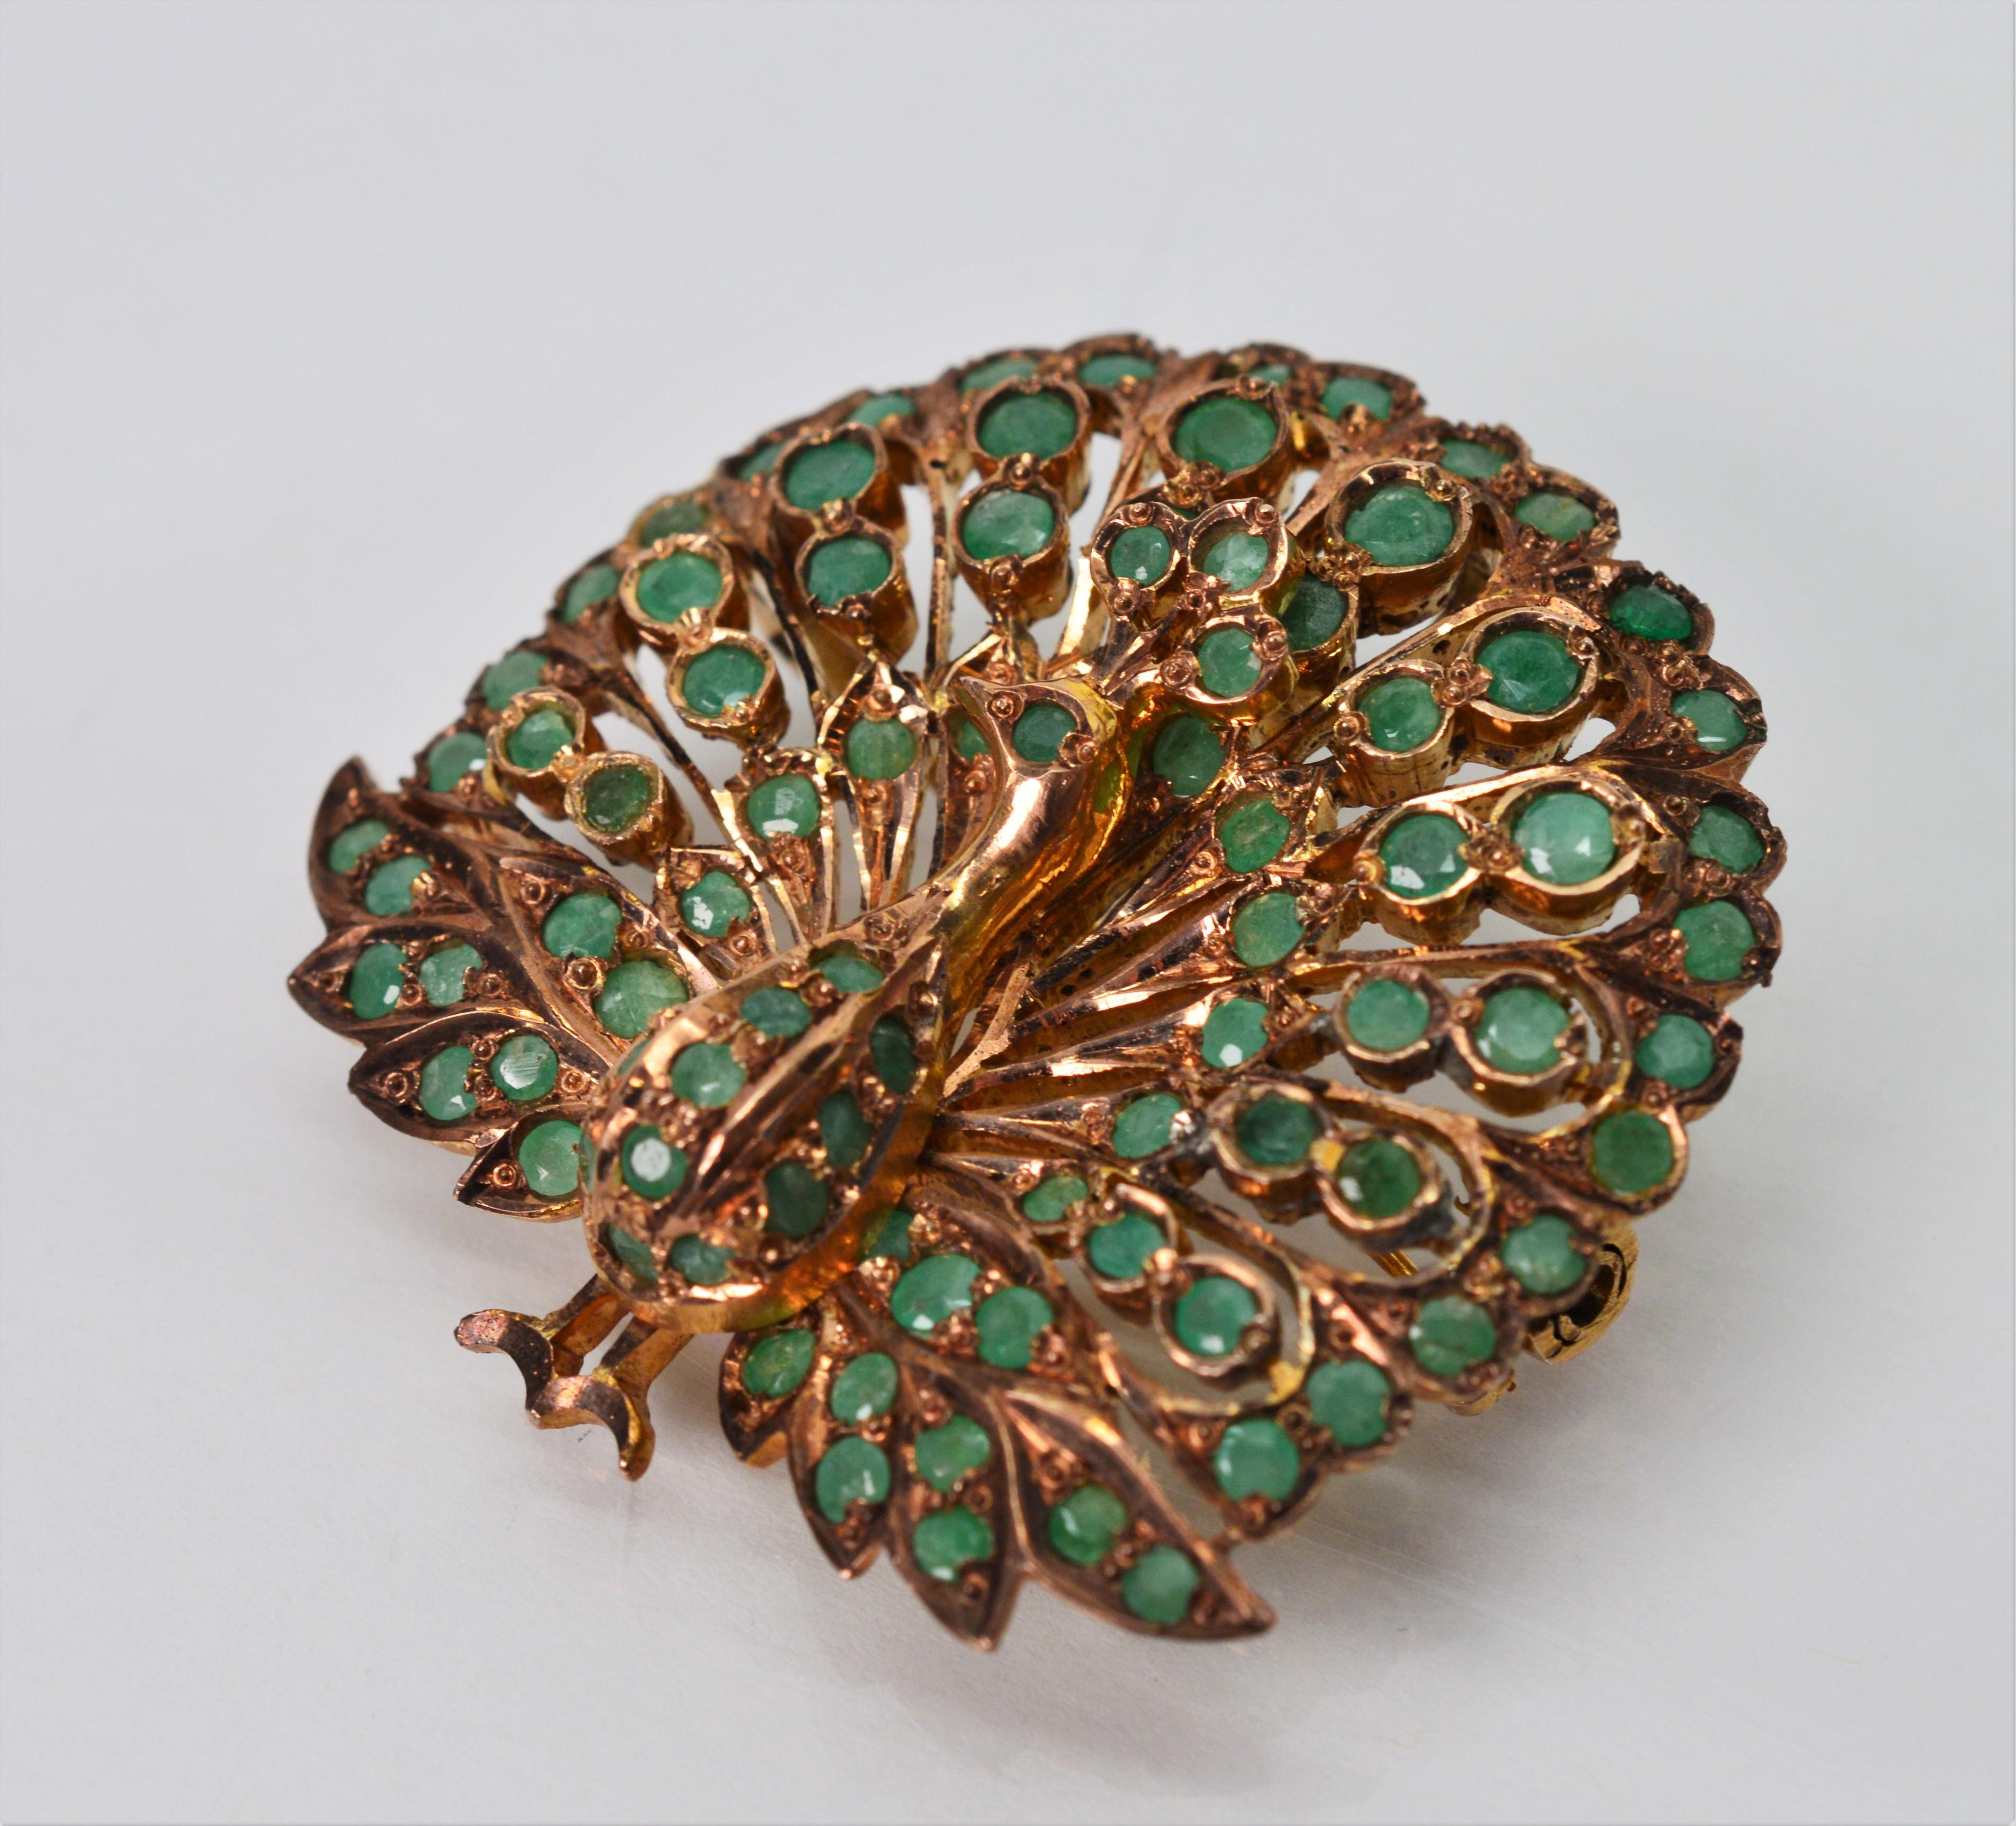 With emerald plumage proudly displayed, this glorious peacock brooch is sure to get attention. Made of seven carat 7 karat rose gold with a pleasing vintage patina and over seventy natural crude hand cut emeralds stones Two inches tall and 1-1/2